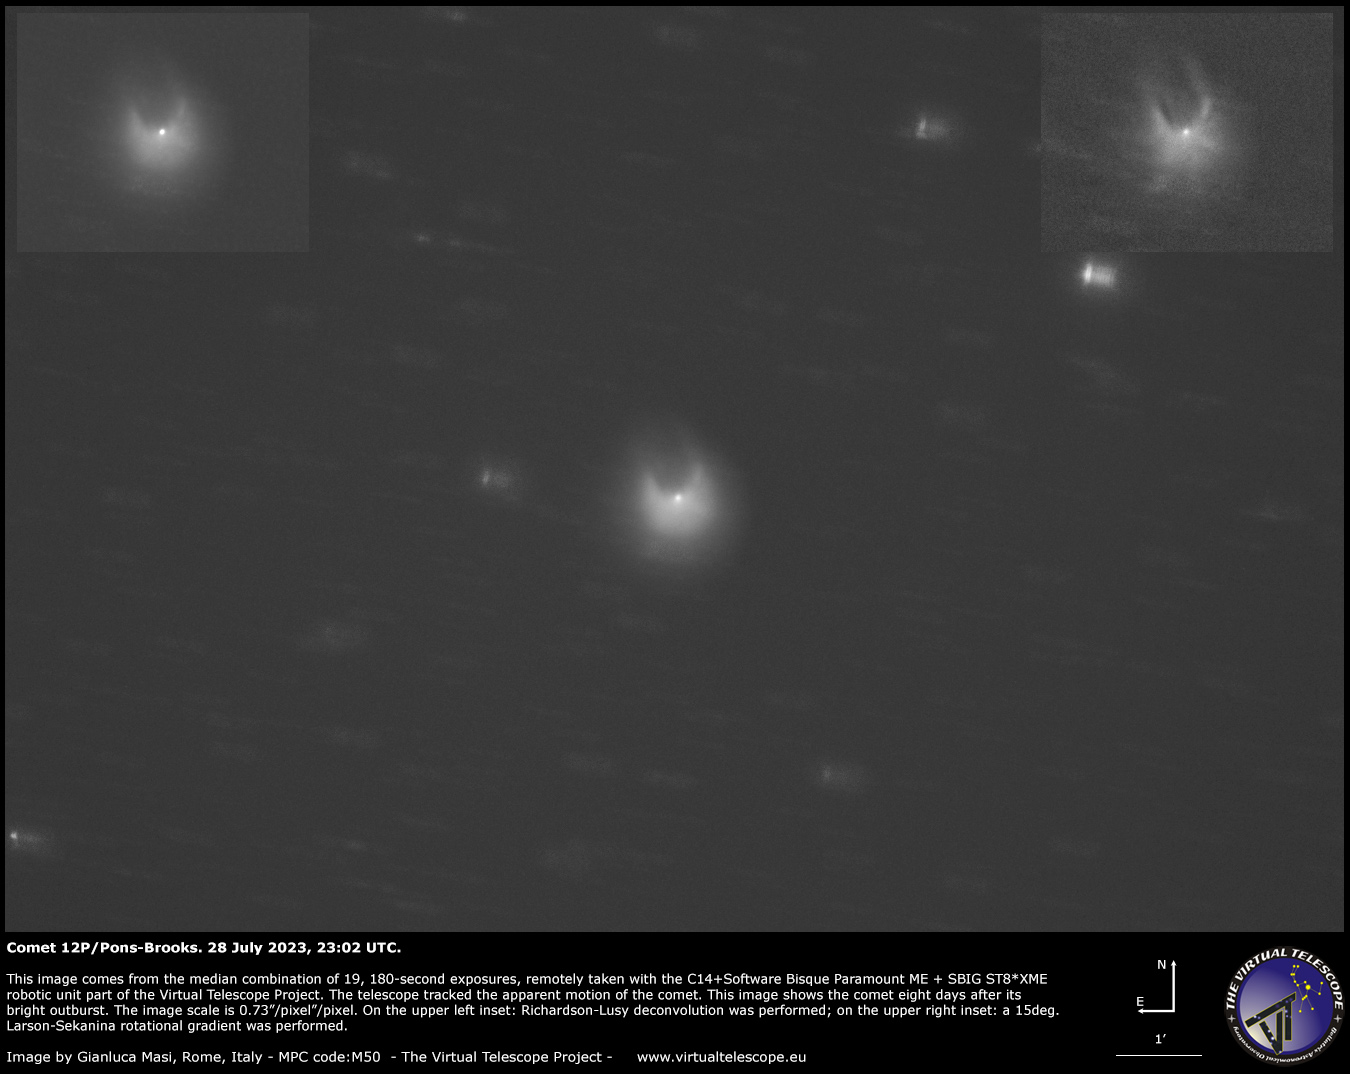 Comet 12P/Pons-Brooks in outburst: 28 July 2023.